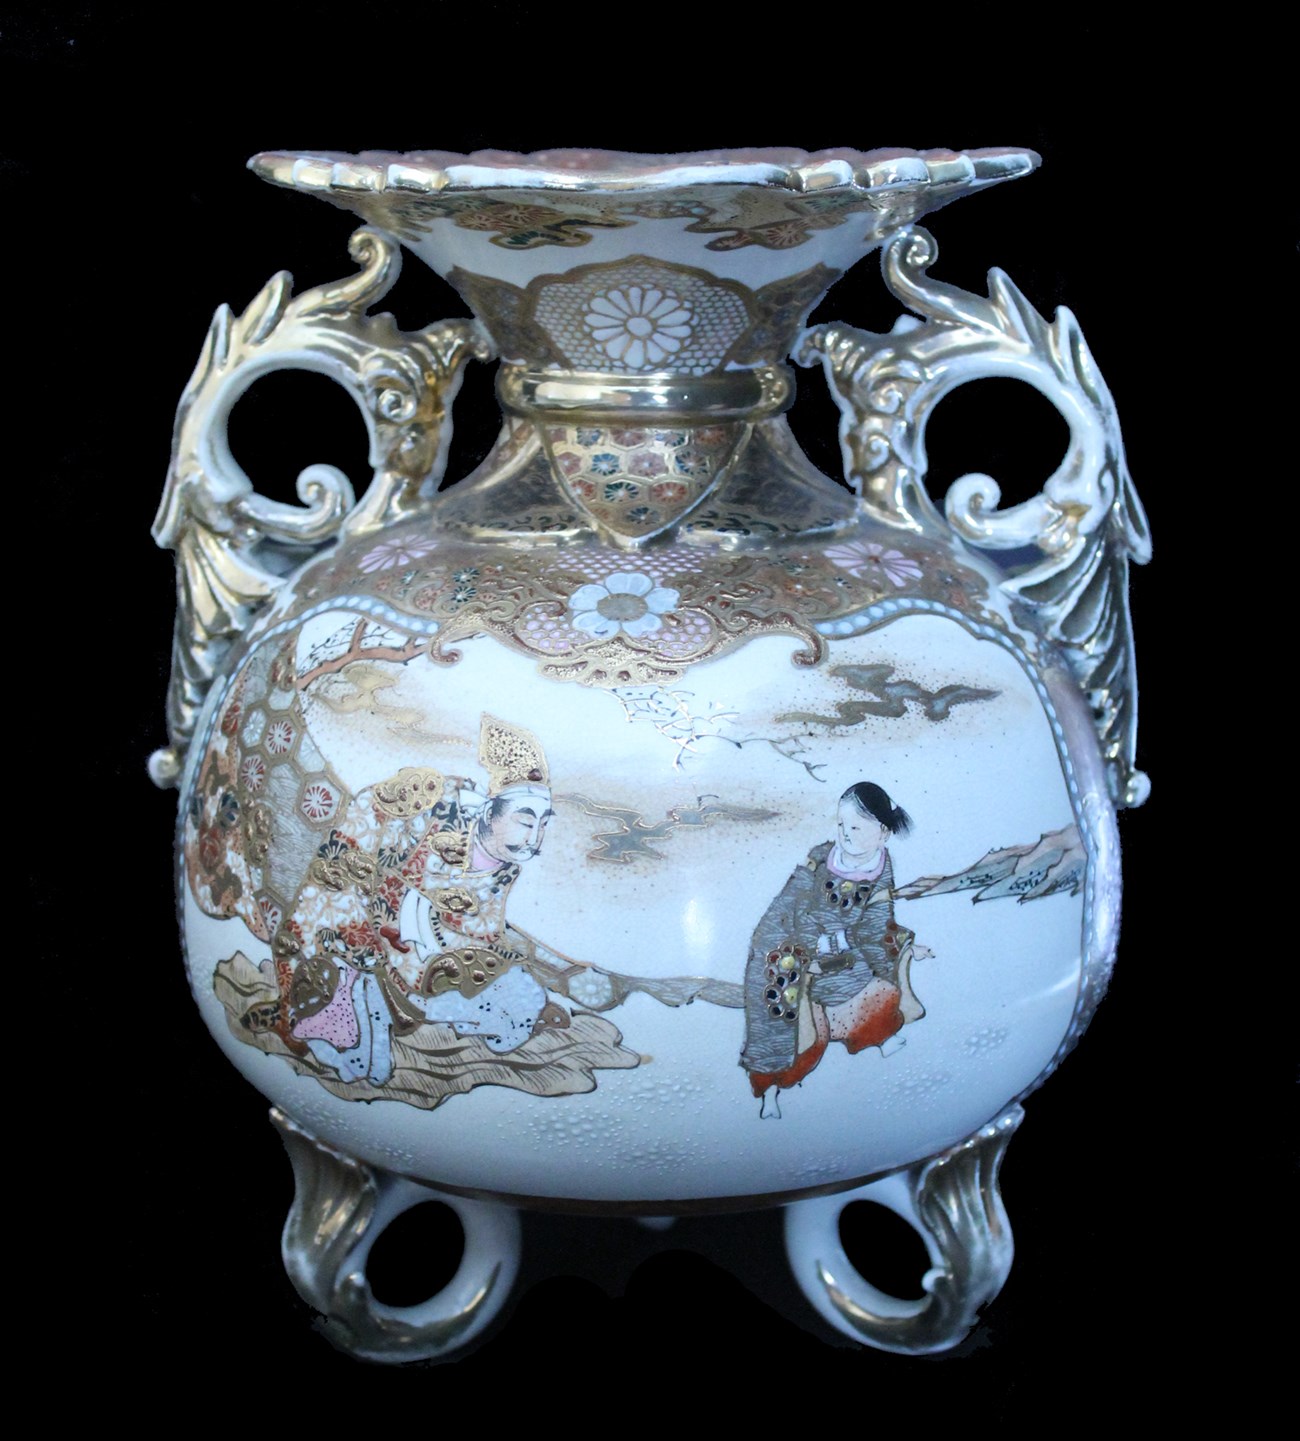 footed vase with round body and flared lip, decorated with scene of two figures and floral design